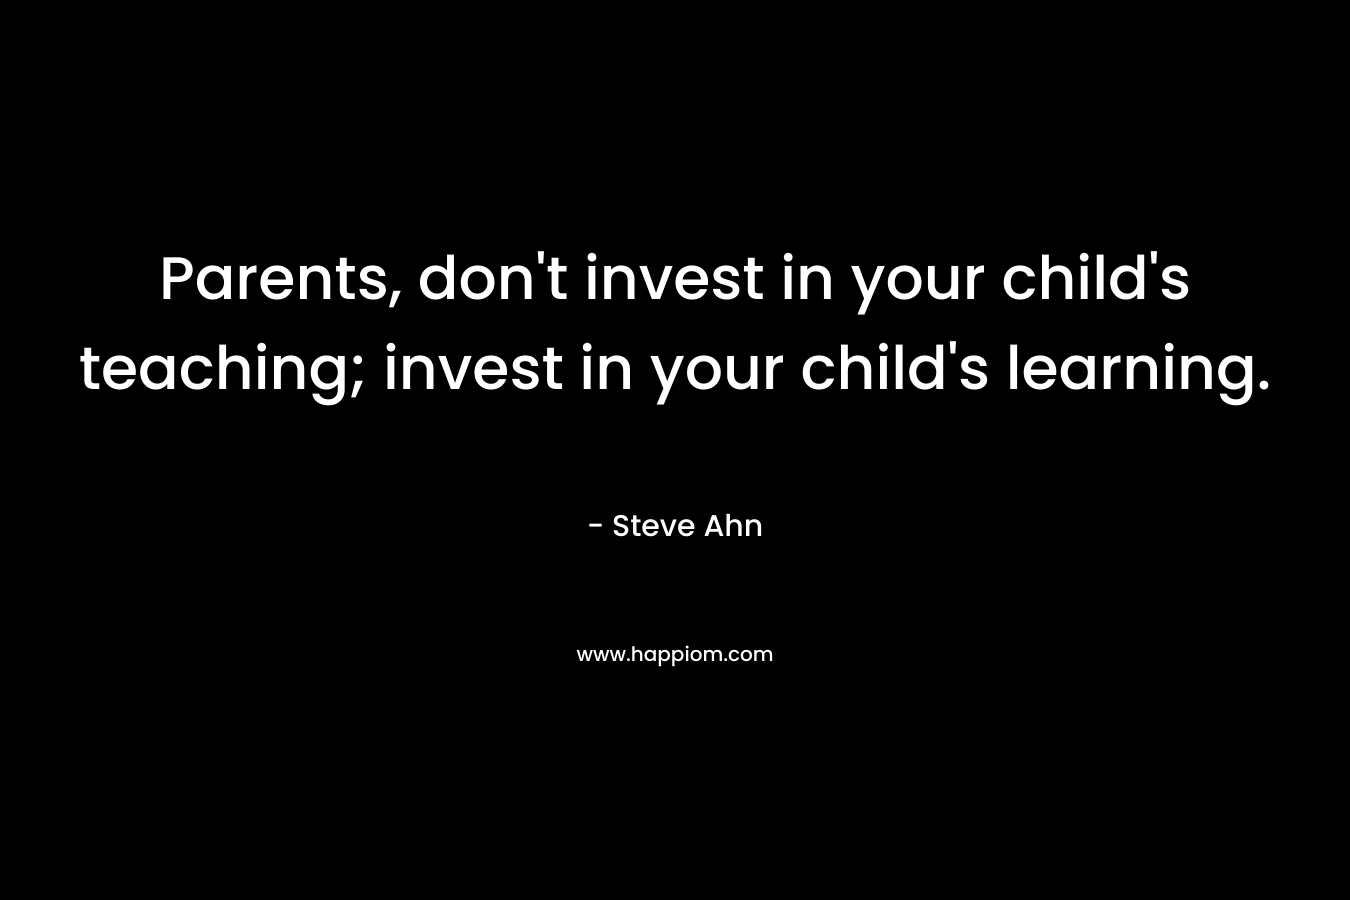 Parents, don’t invest in your child’s teaching; invest in your child’s learning. – Steve Ahn